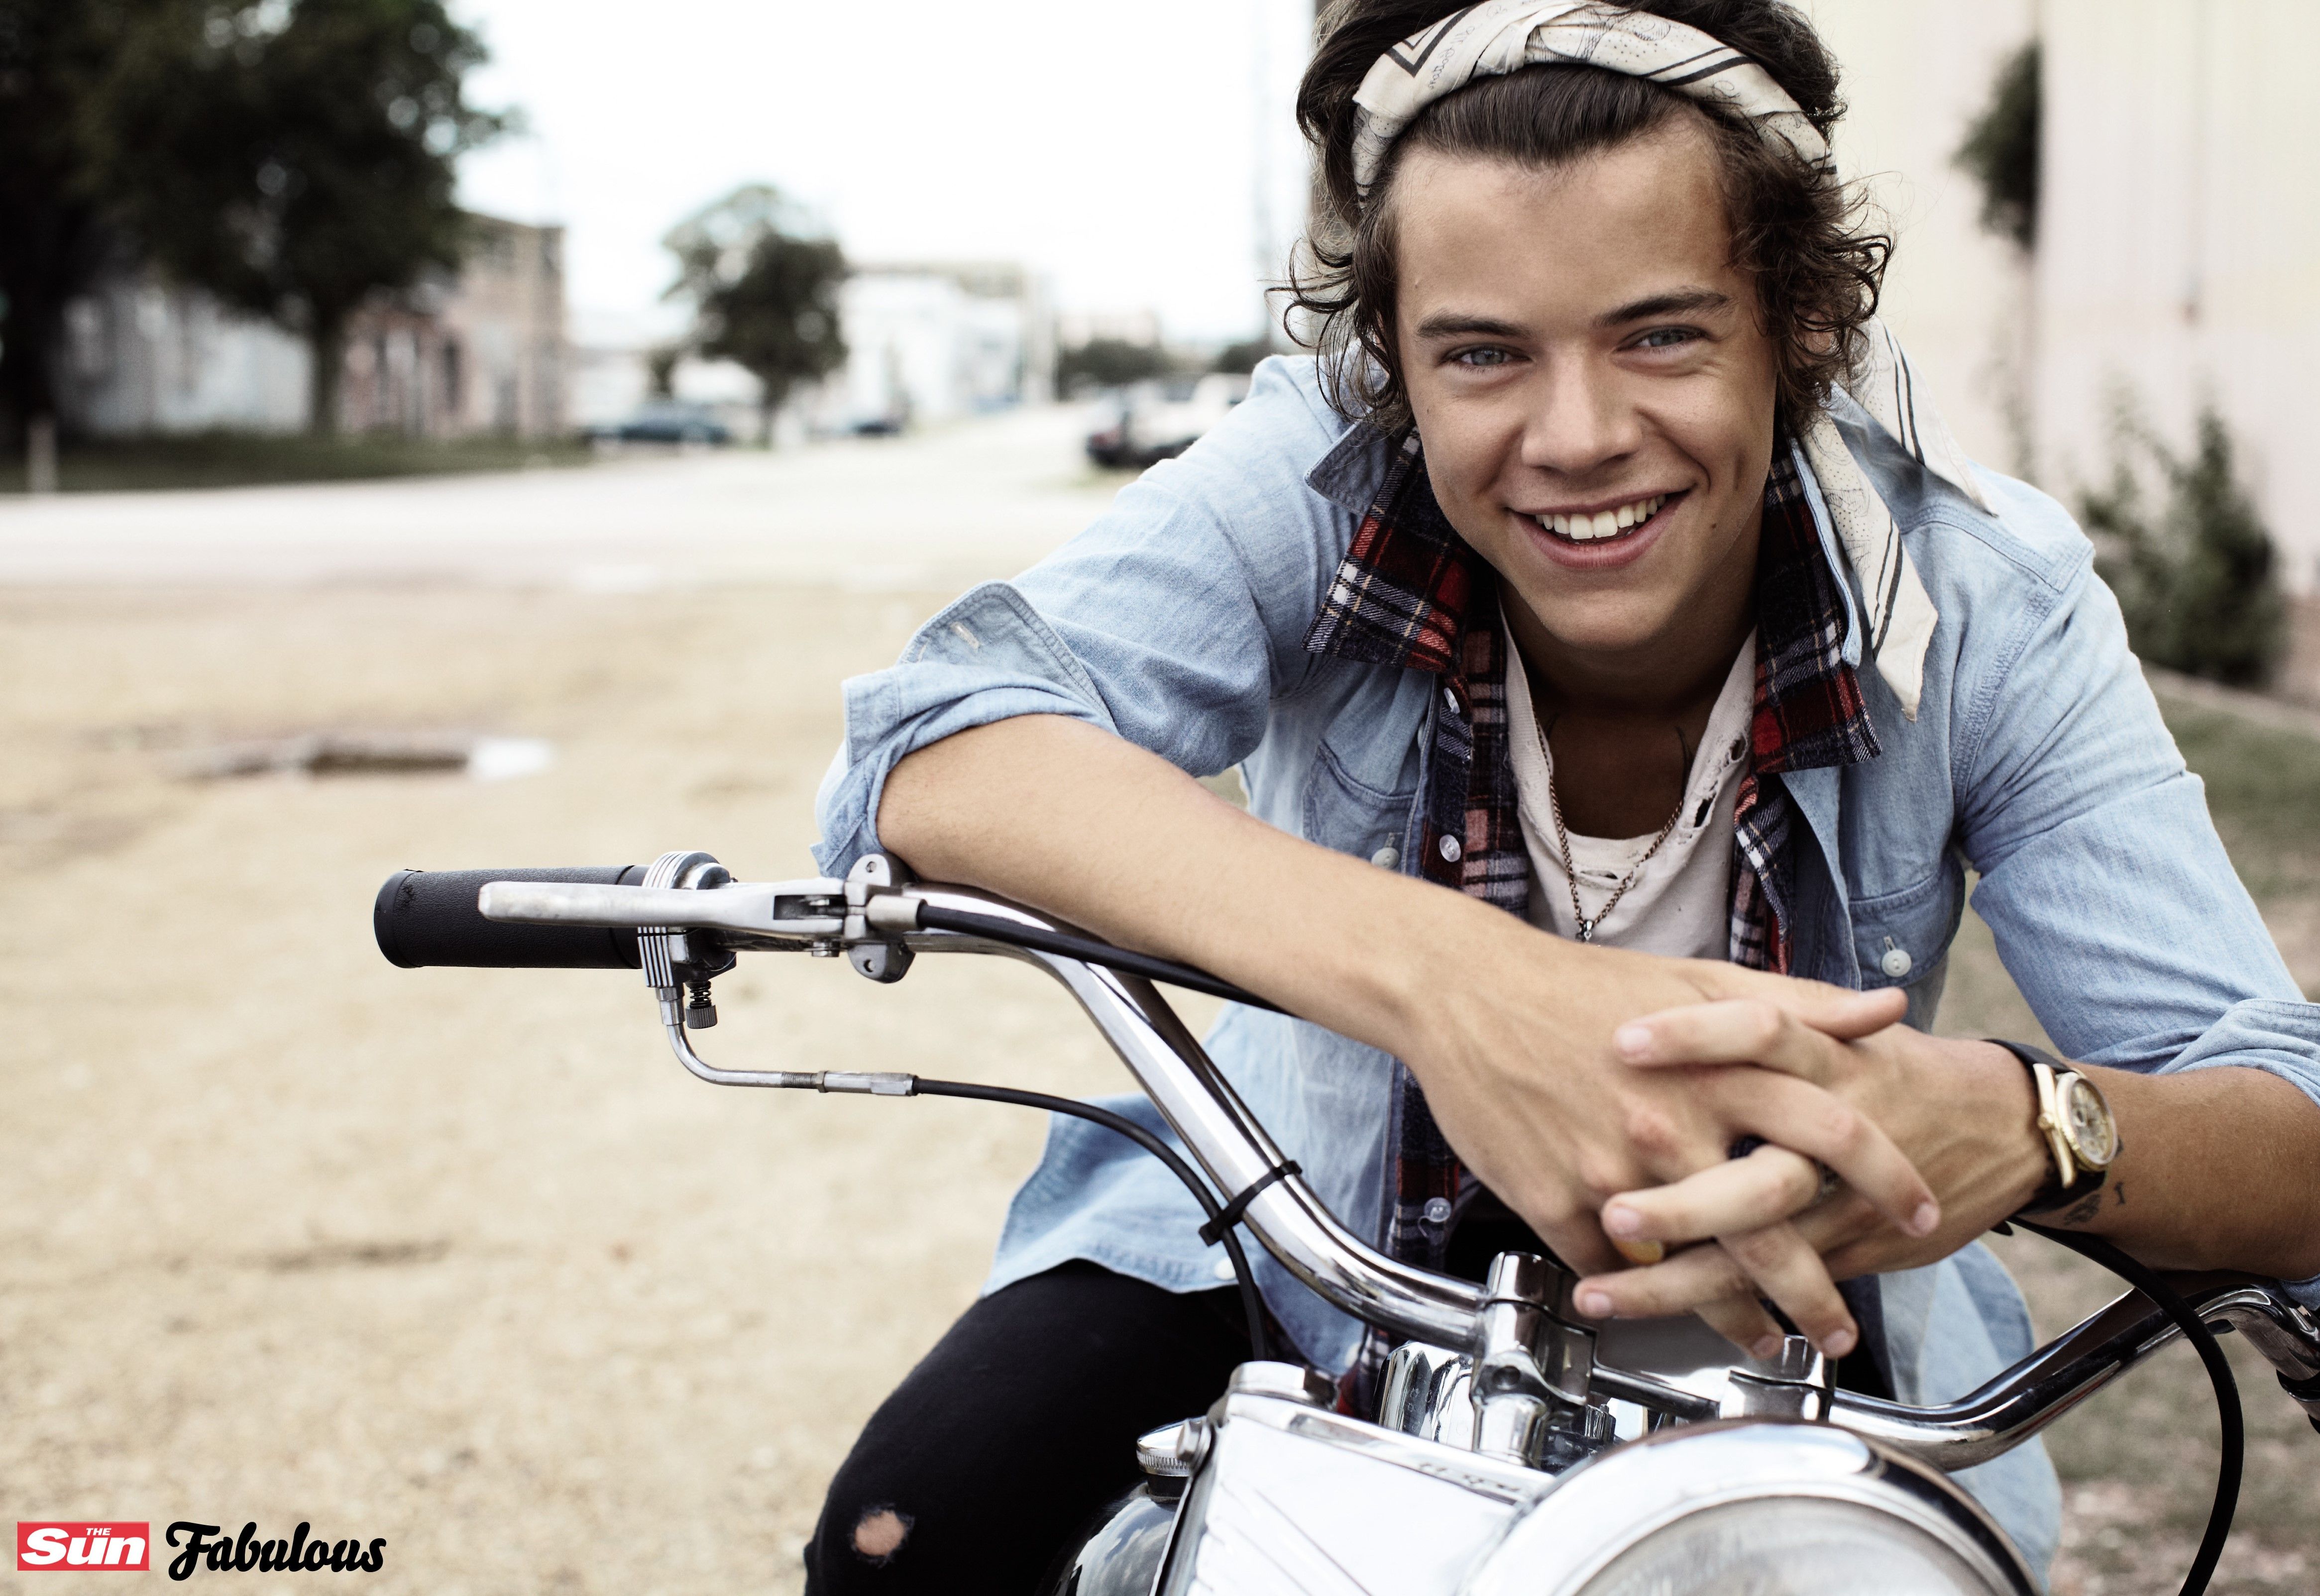 One direction, 1d, Harry styles, Musician, Photo shoot